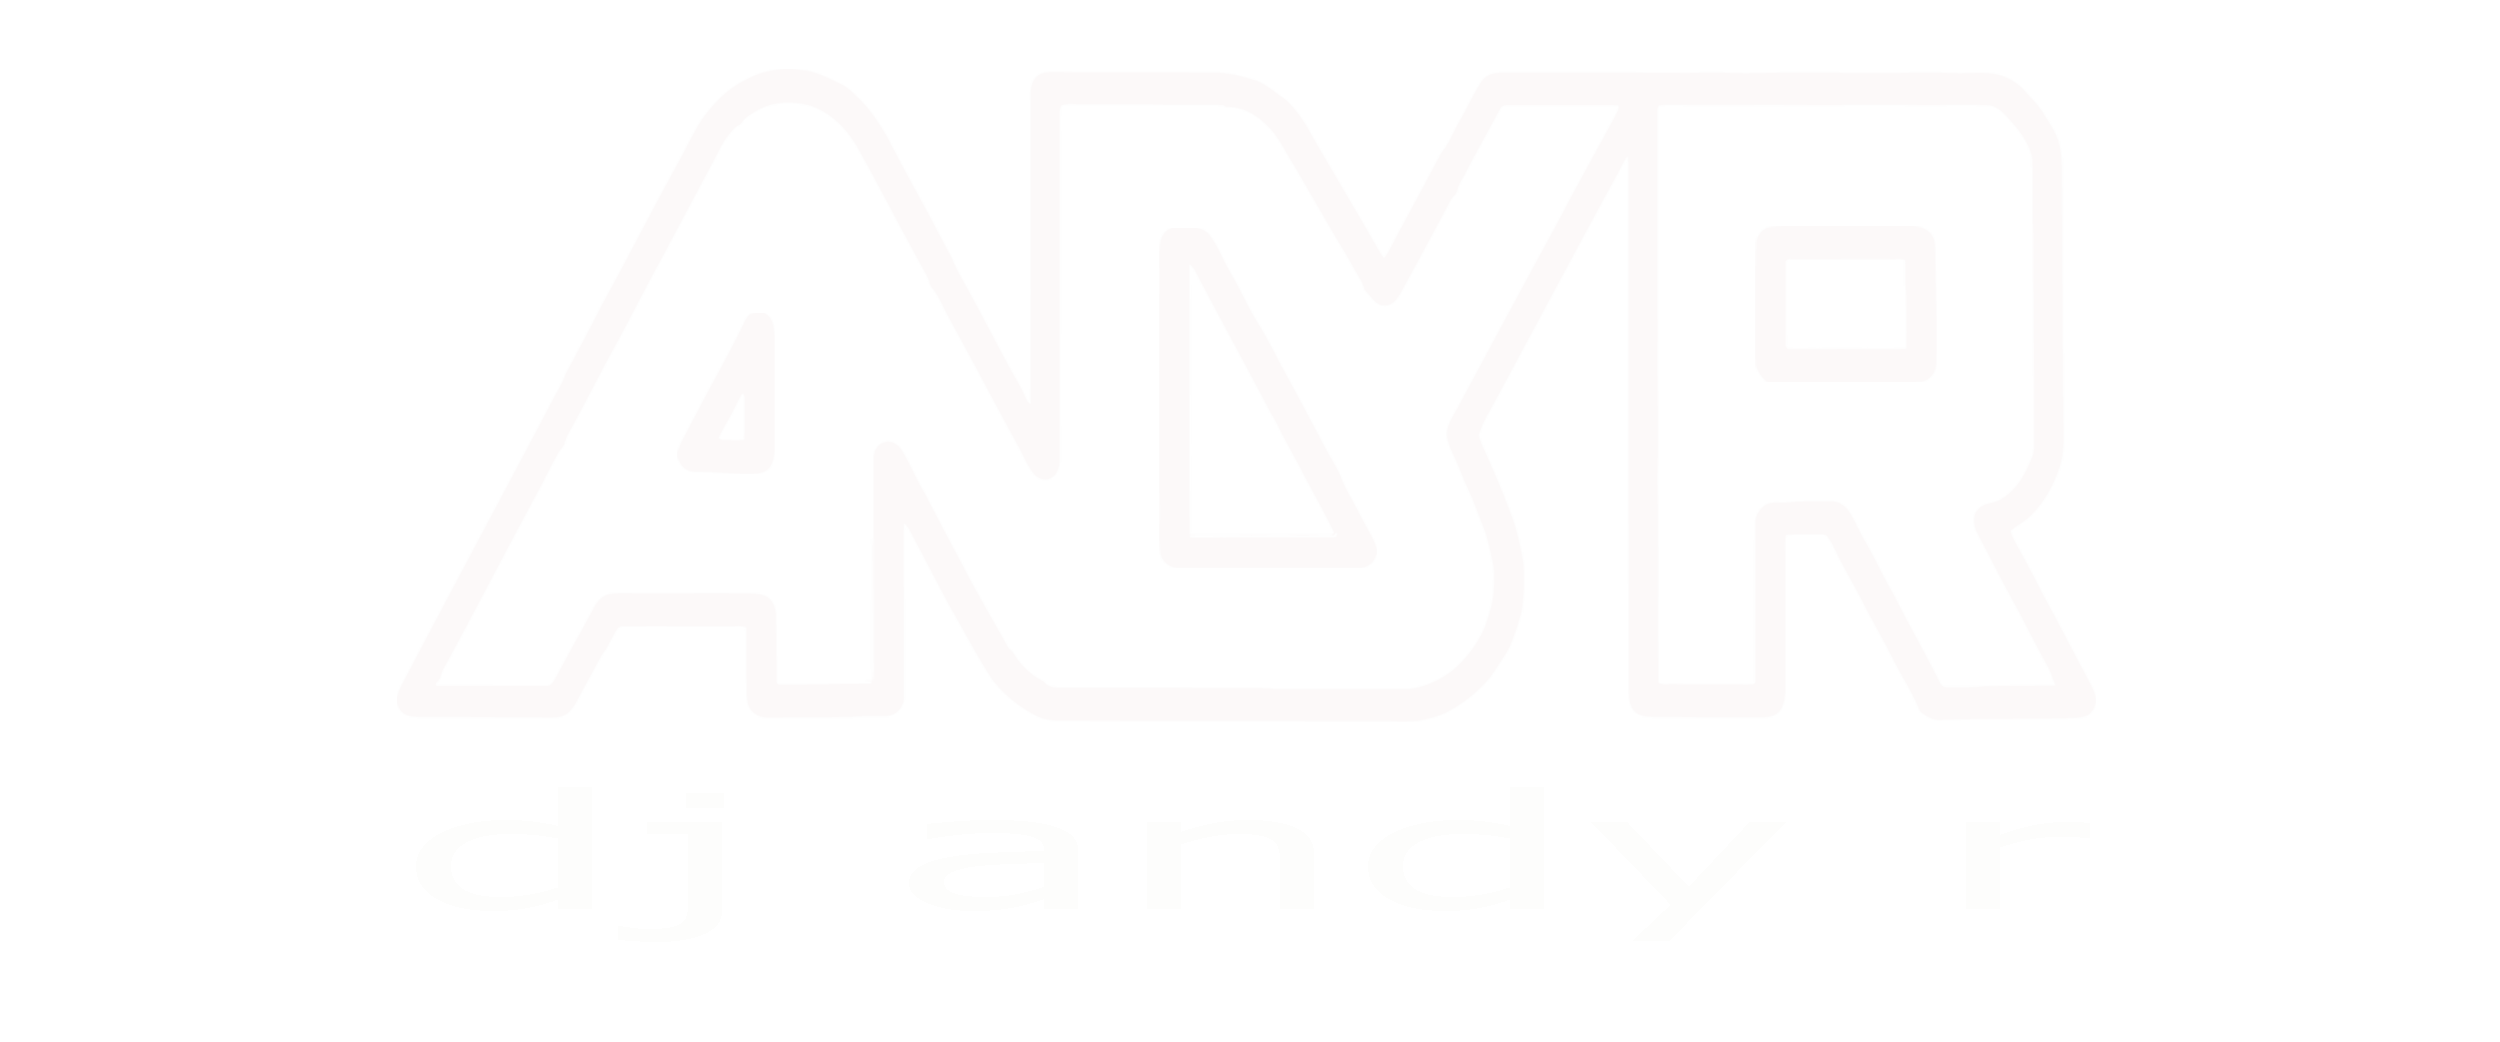 Dj Andy R klub, event, chillout, jazz, nu disco, deep house.